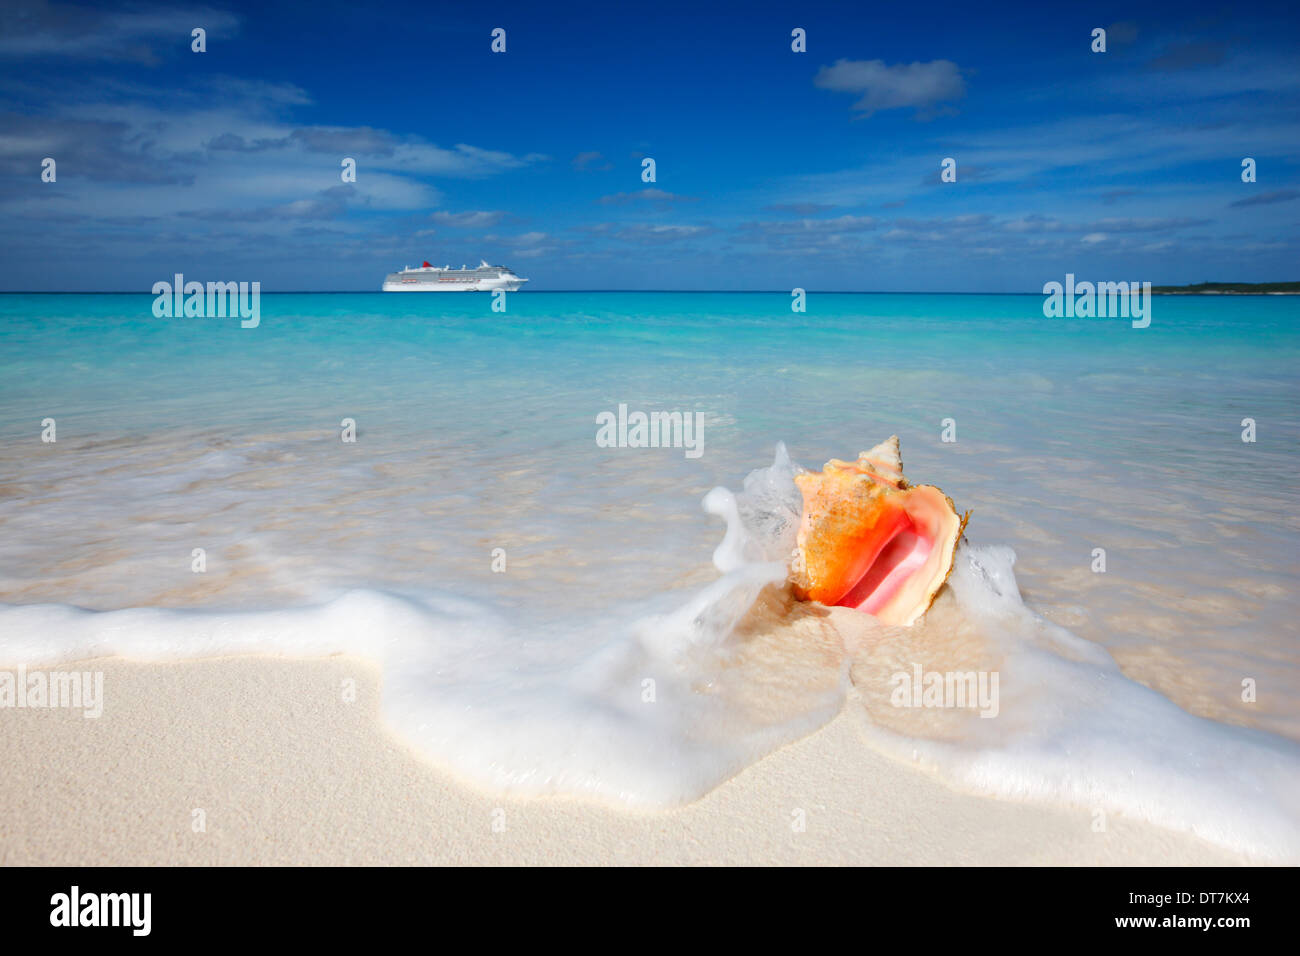 Caribbean sand beach with queen conch shell in front and cruise line ship on the horizon. Stock Photo